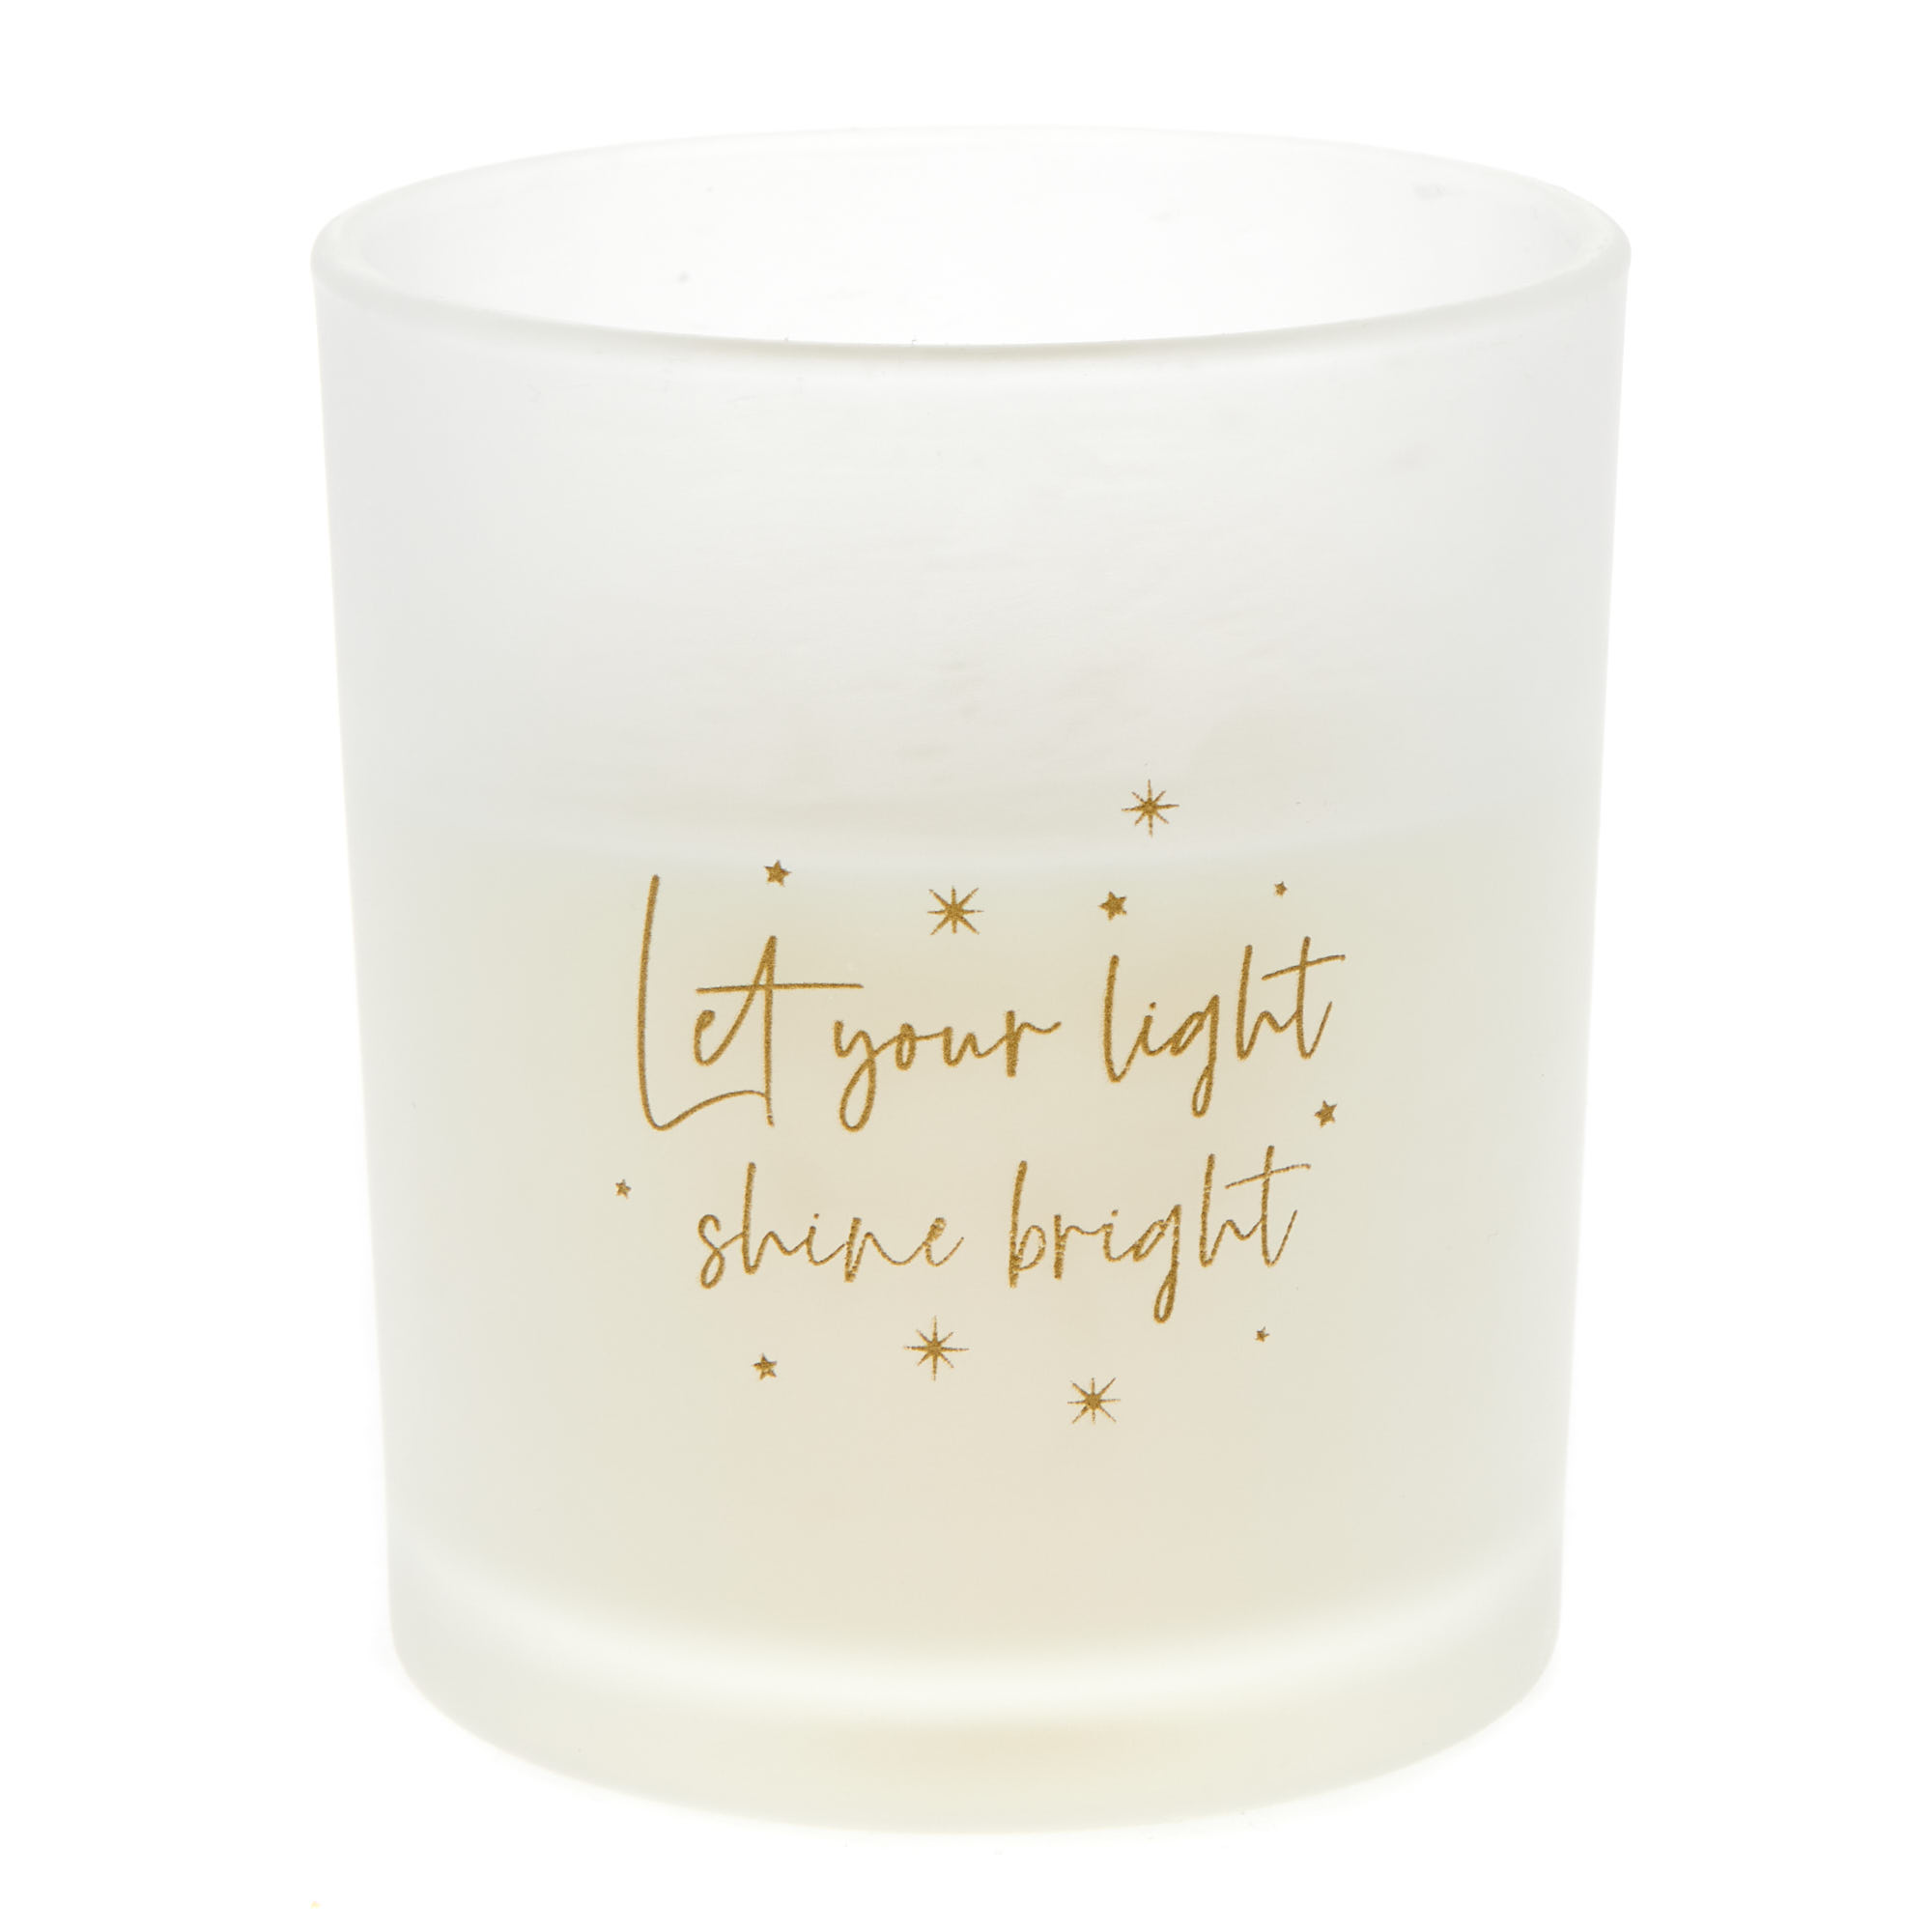 Let Your Light Shine Bright Sweet Jasmine Scented Candle